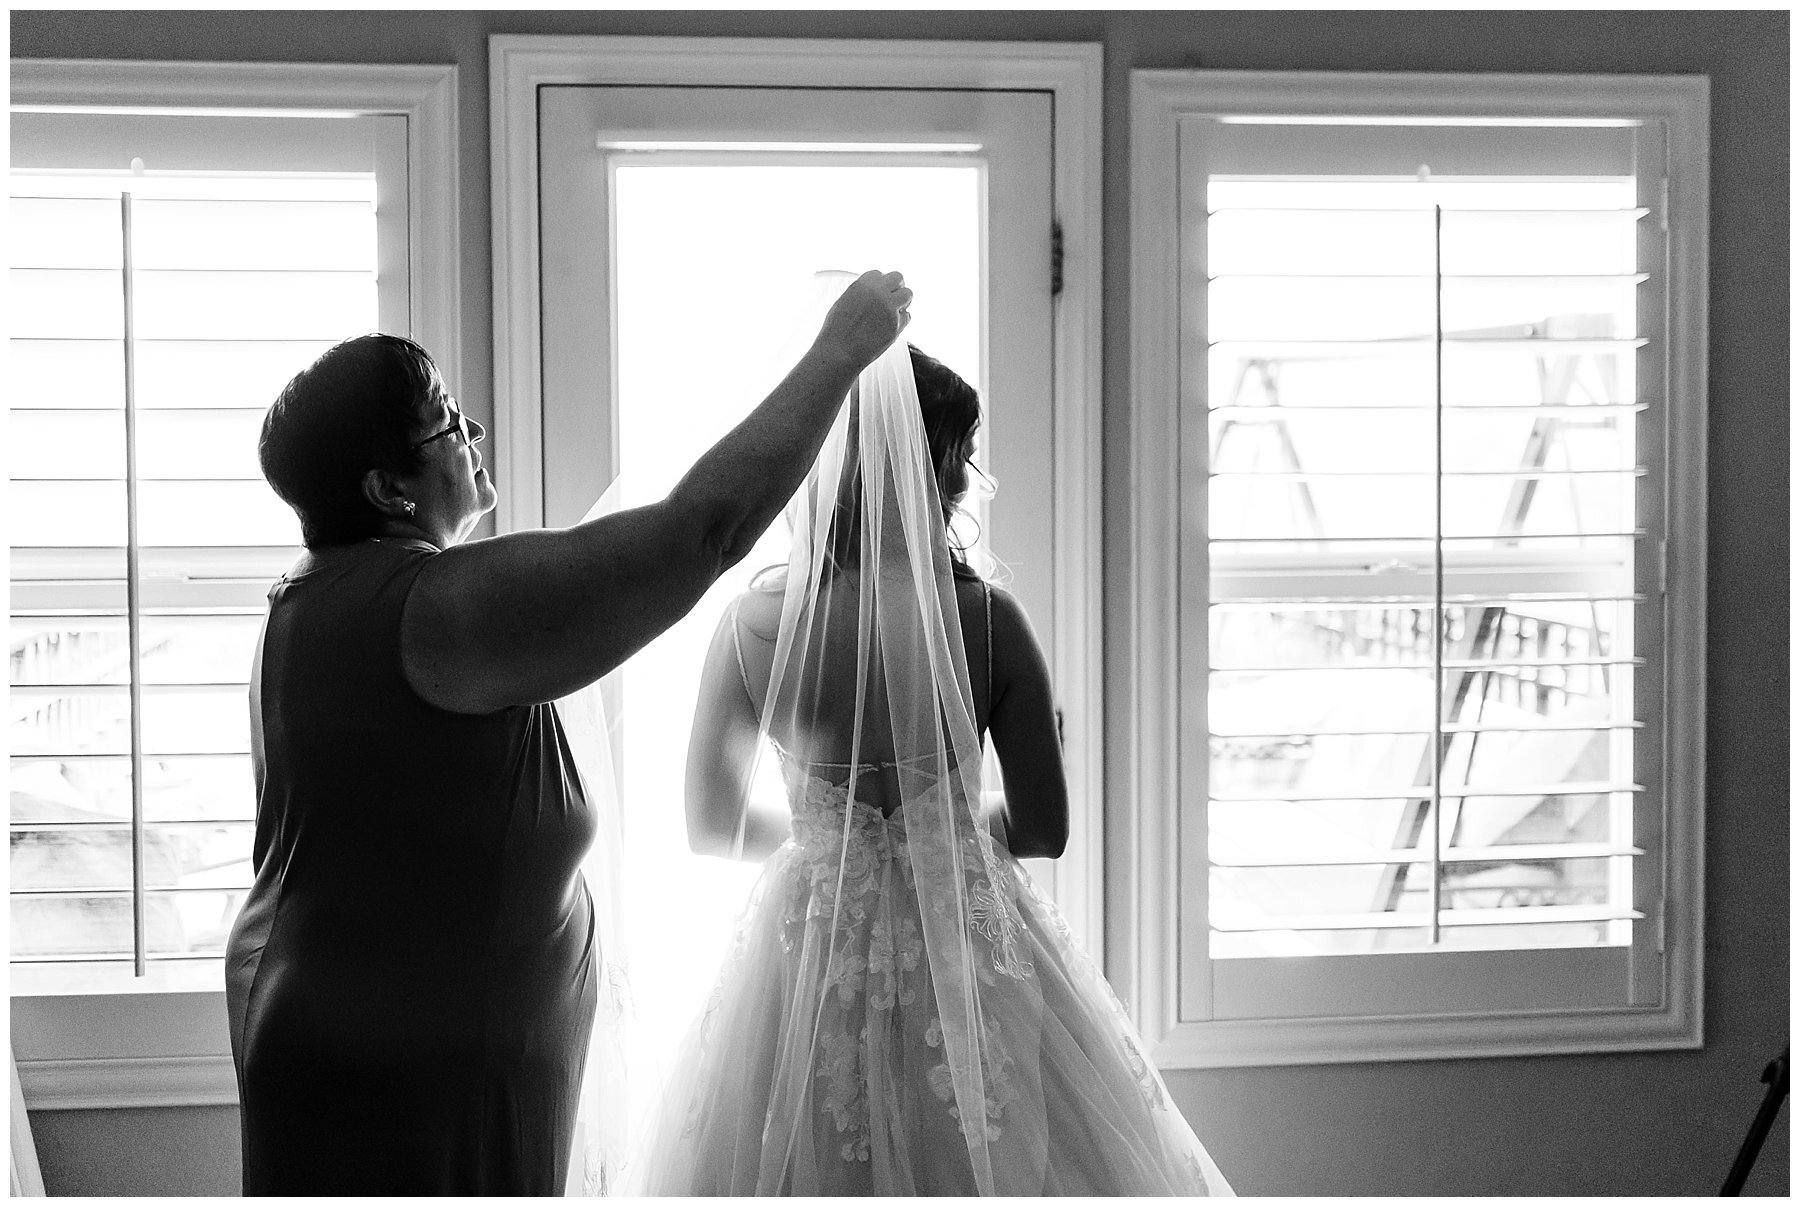  bride getting ready in the bridal suite 